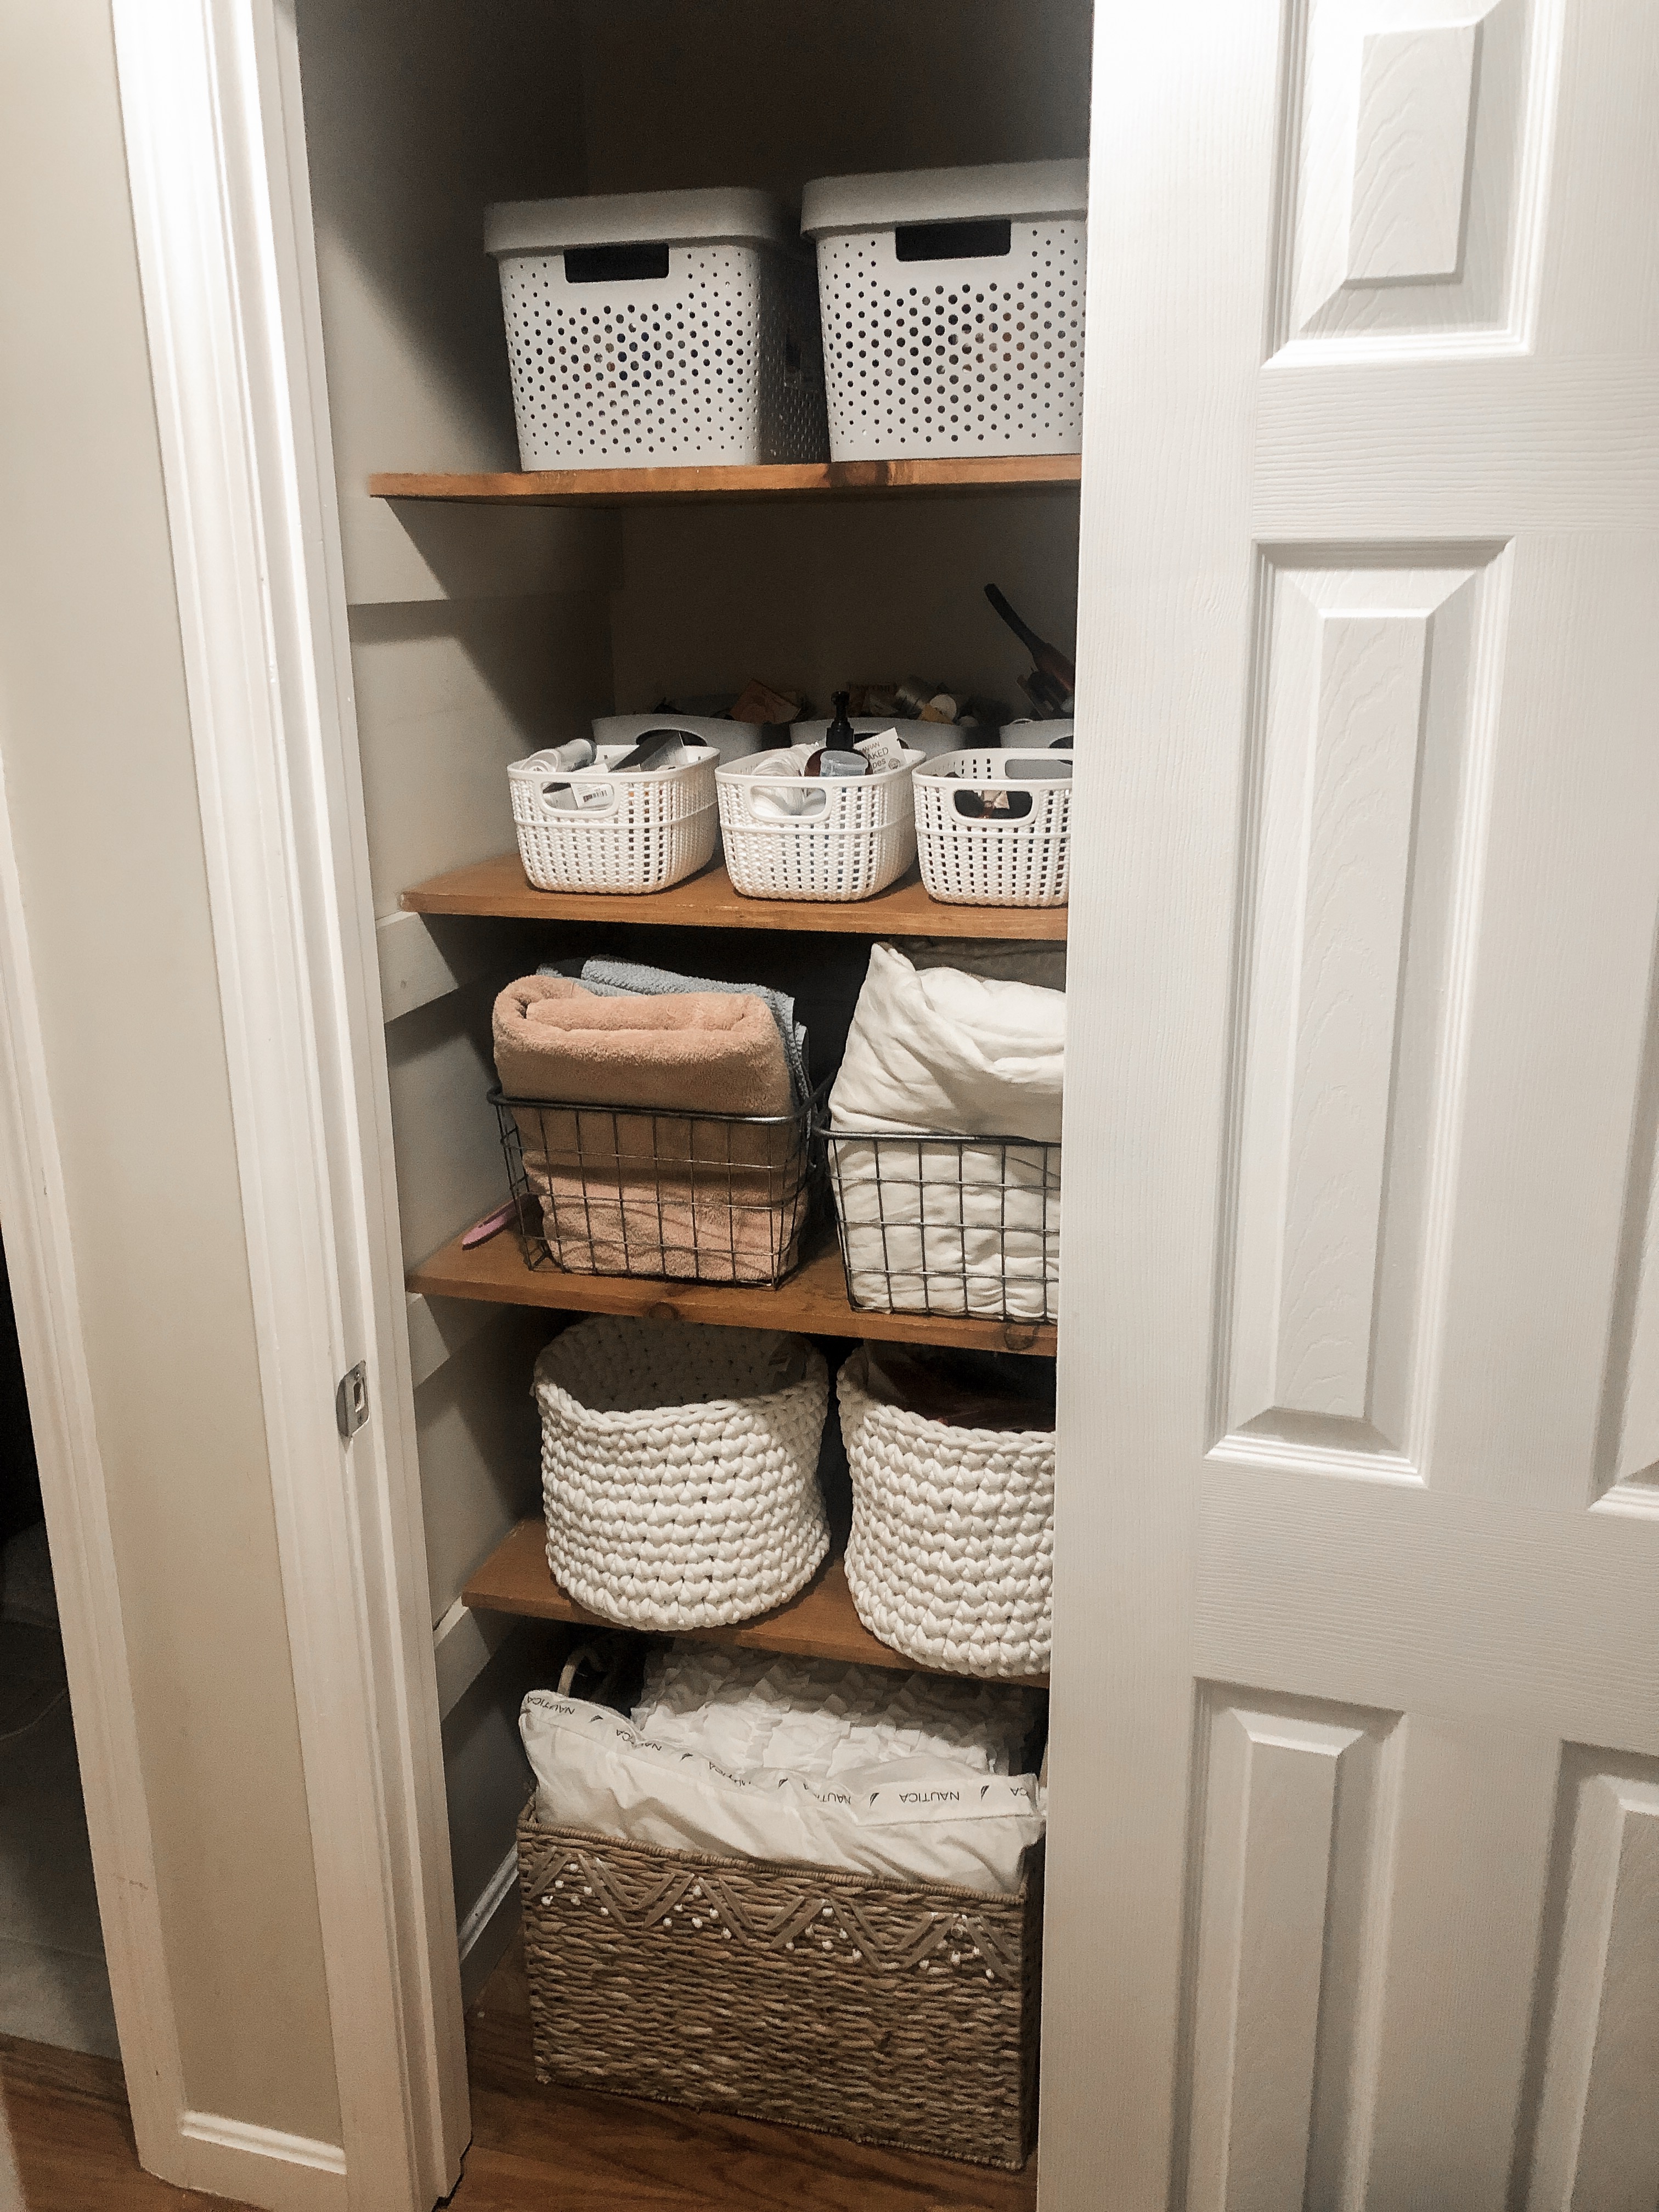 5 tips for how to organize your linen closet with Boiron Acidil and Gasalia